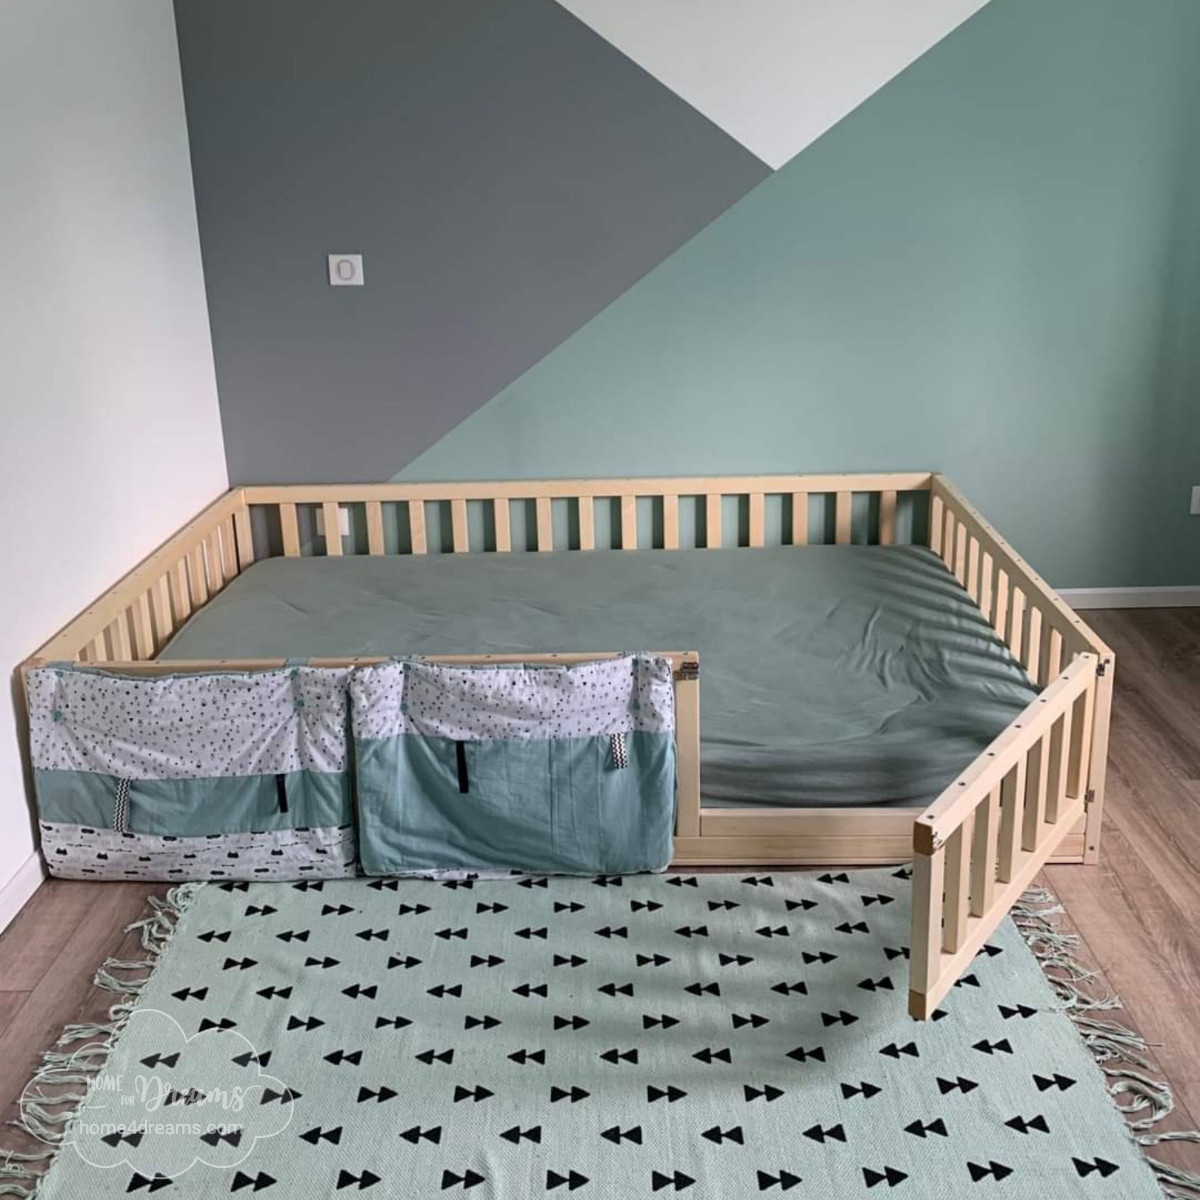 Wooden Floor Crib Bed With Rails